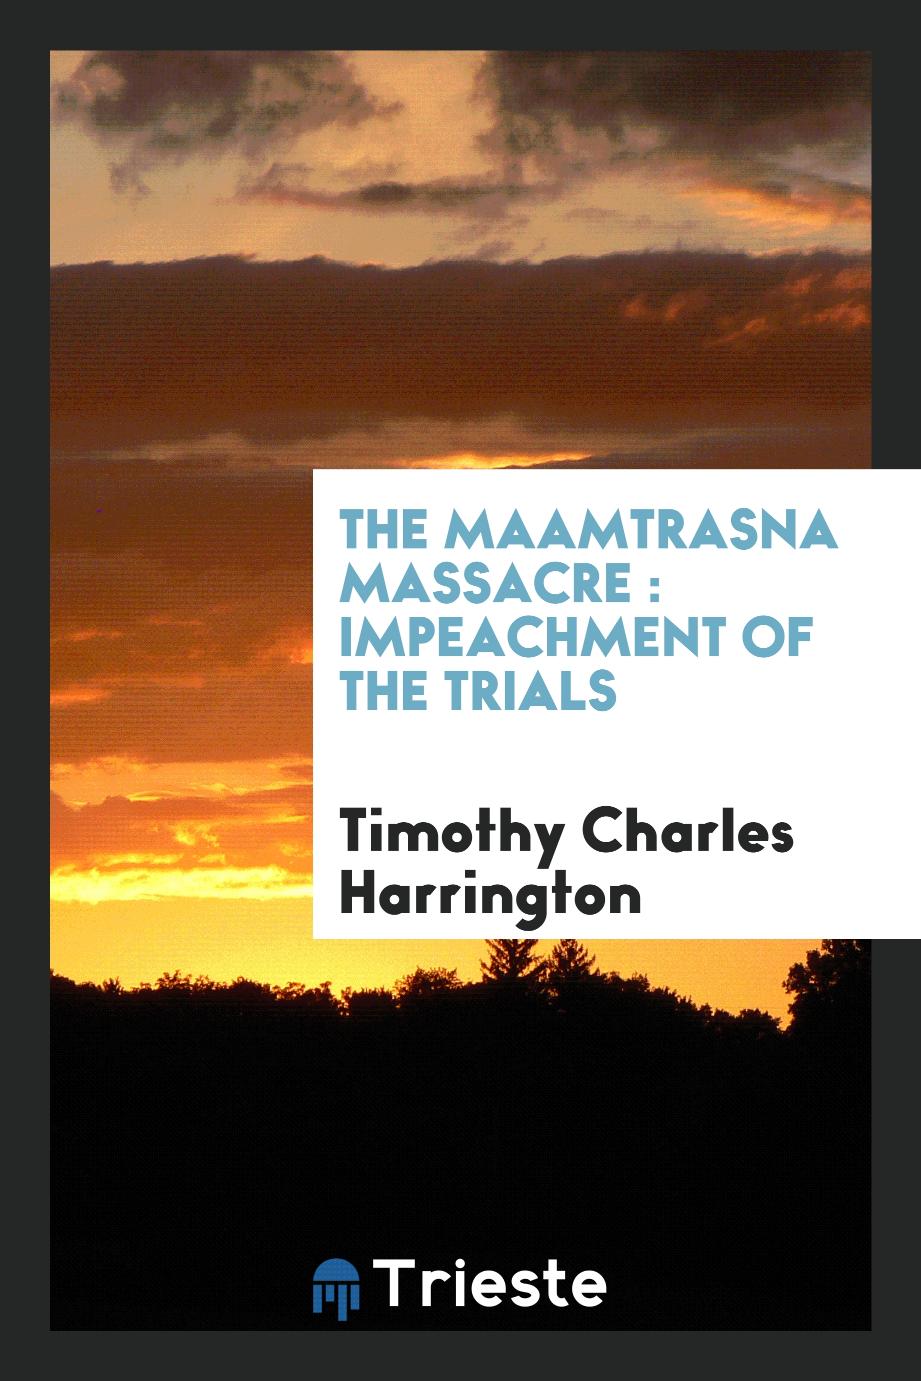 The Maamtrasna massacre : impeachment of the trials